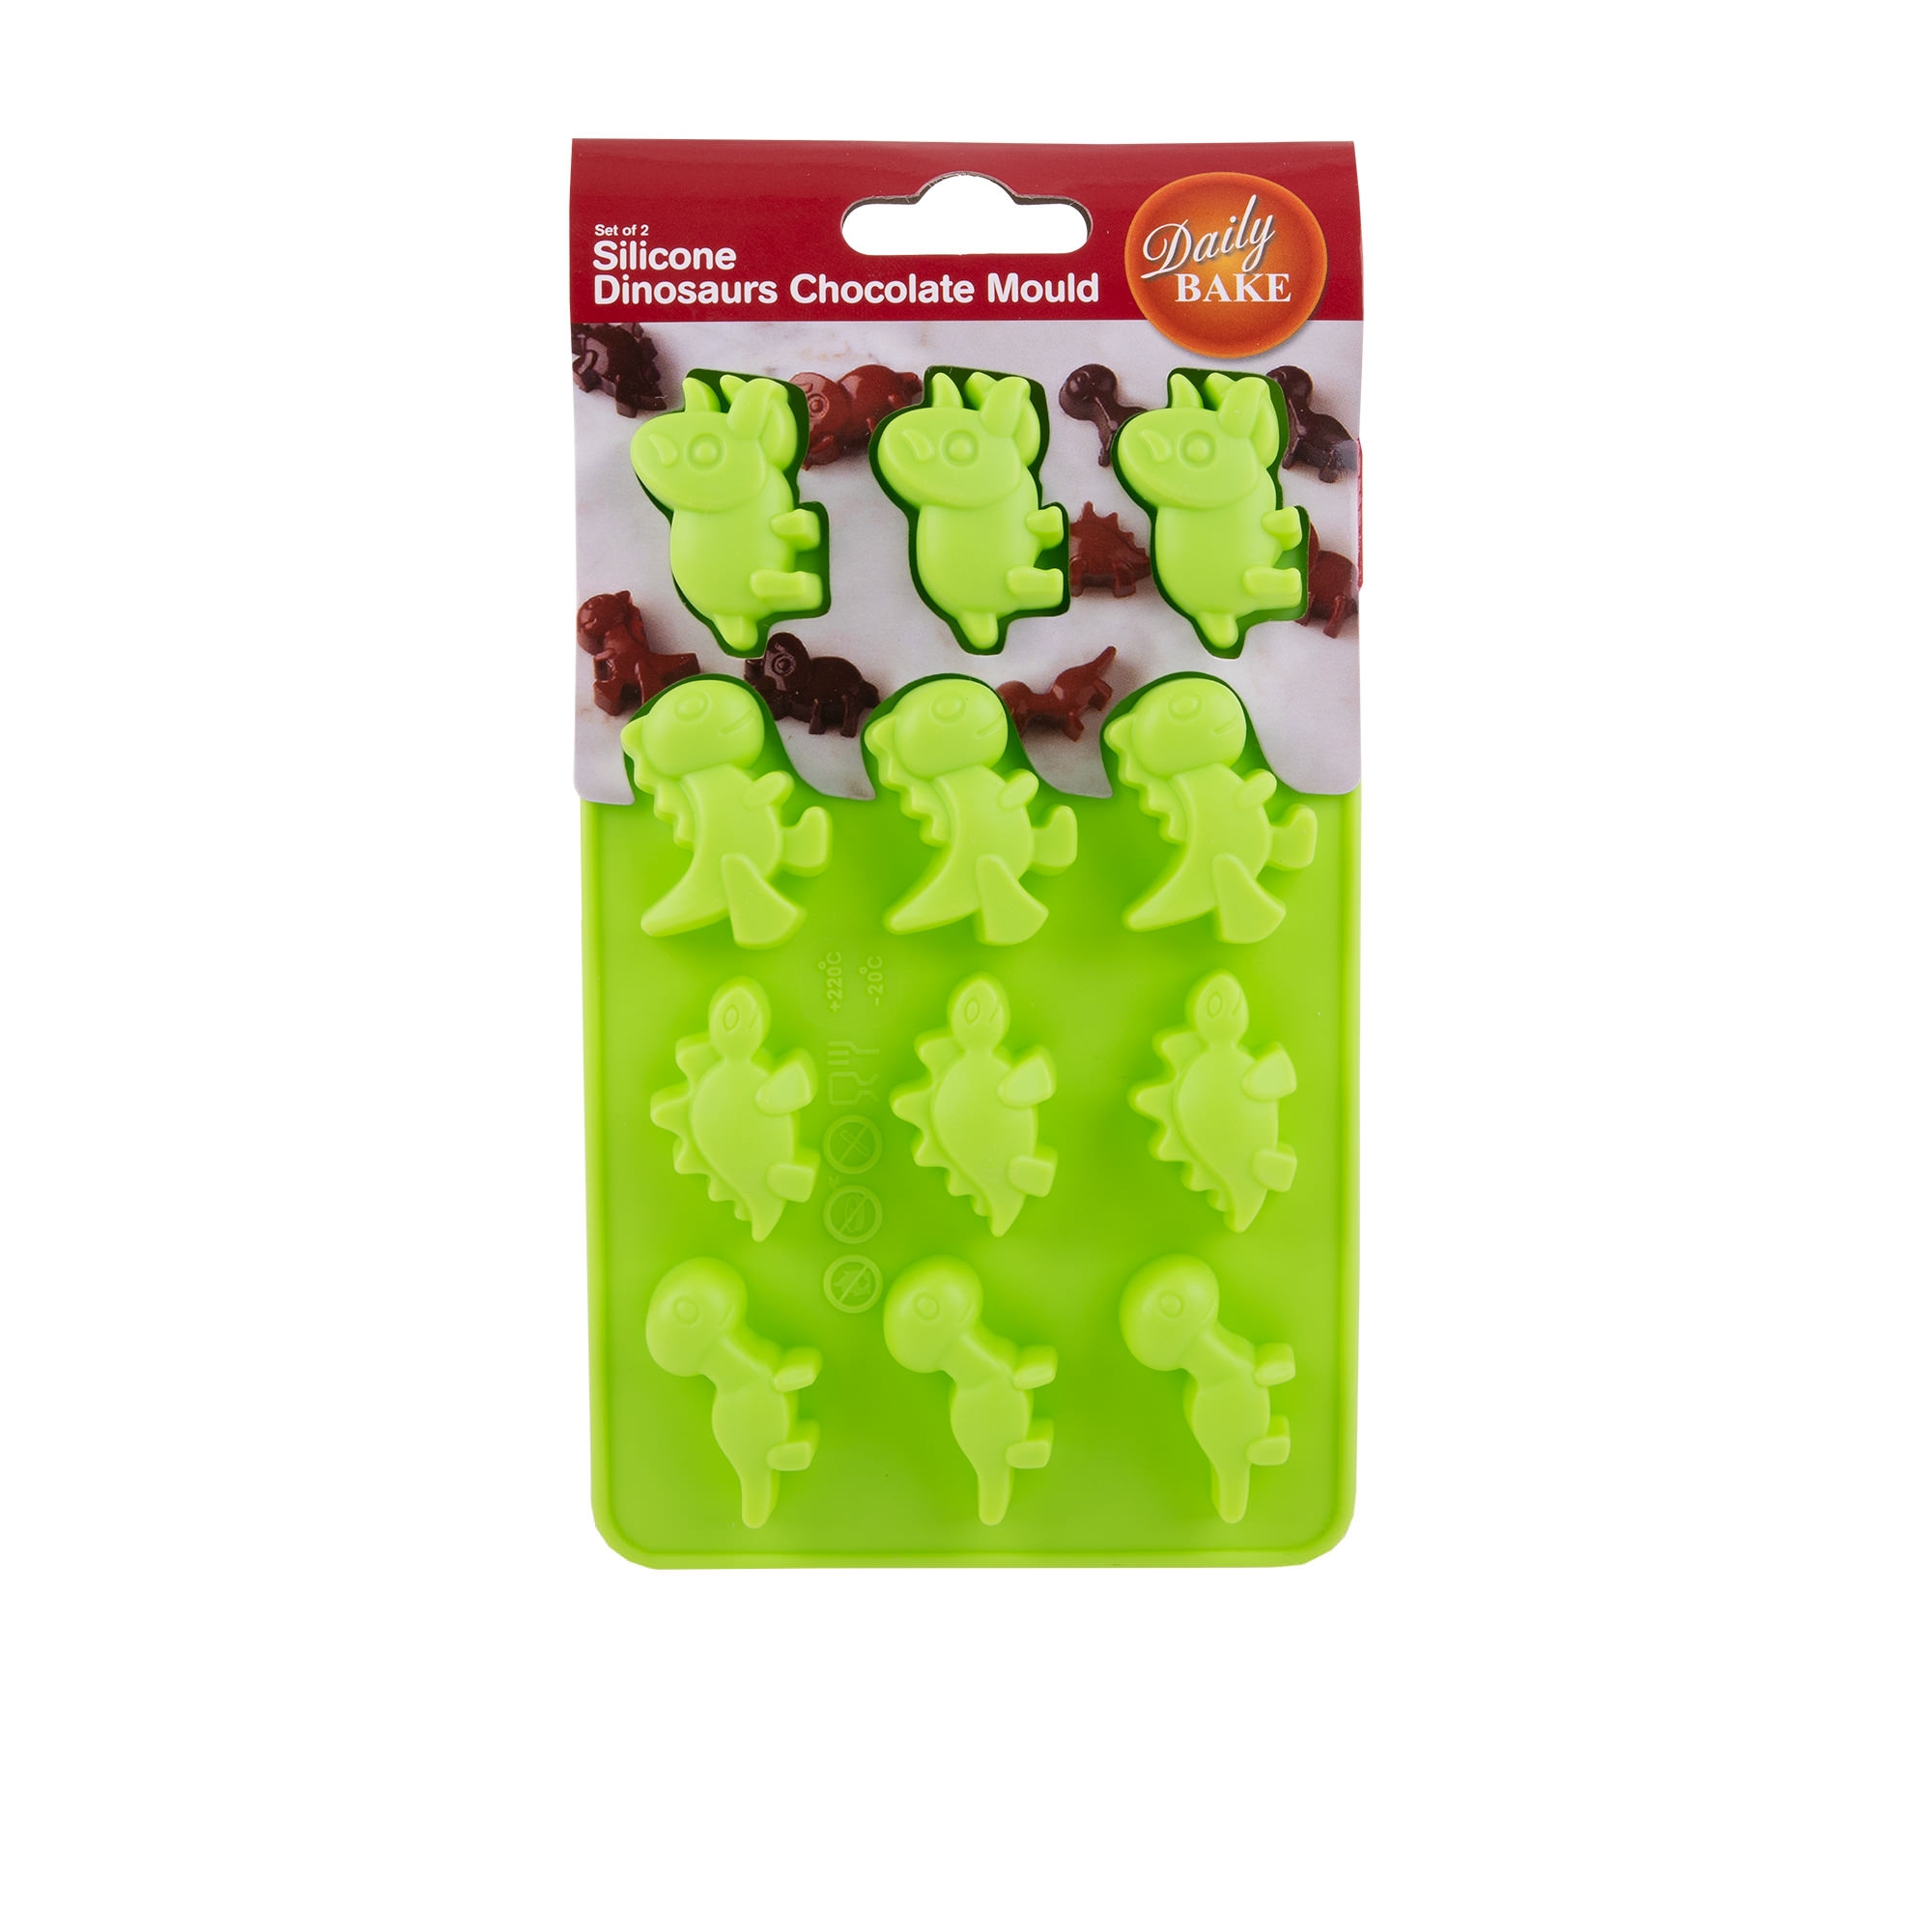 Daily Bake Dinosaur 12 Cup Chocolate Mould Set 2pc Green Image 2